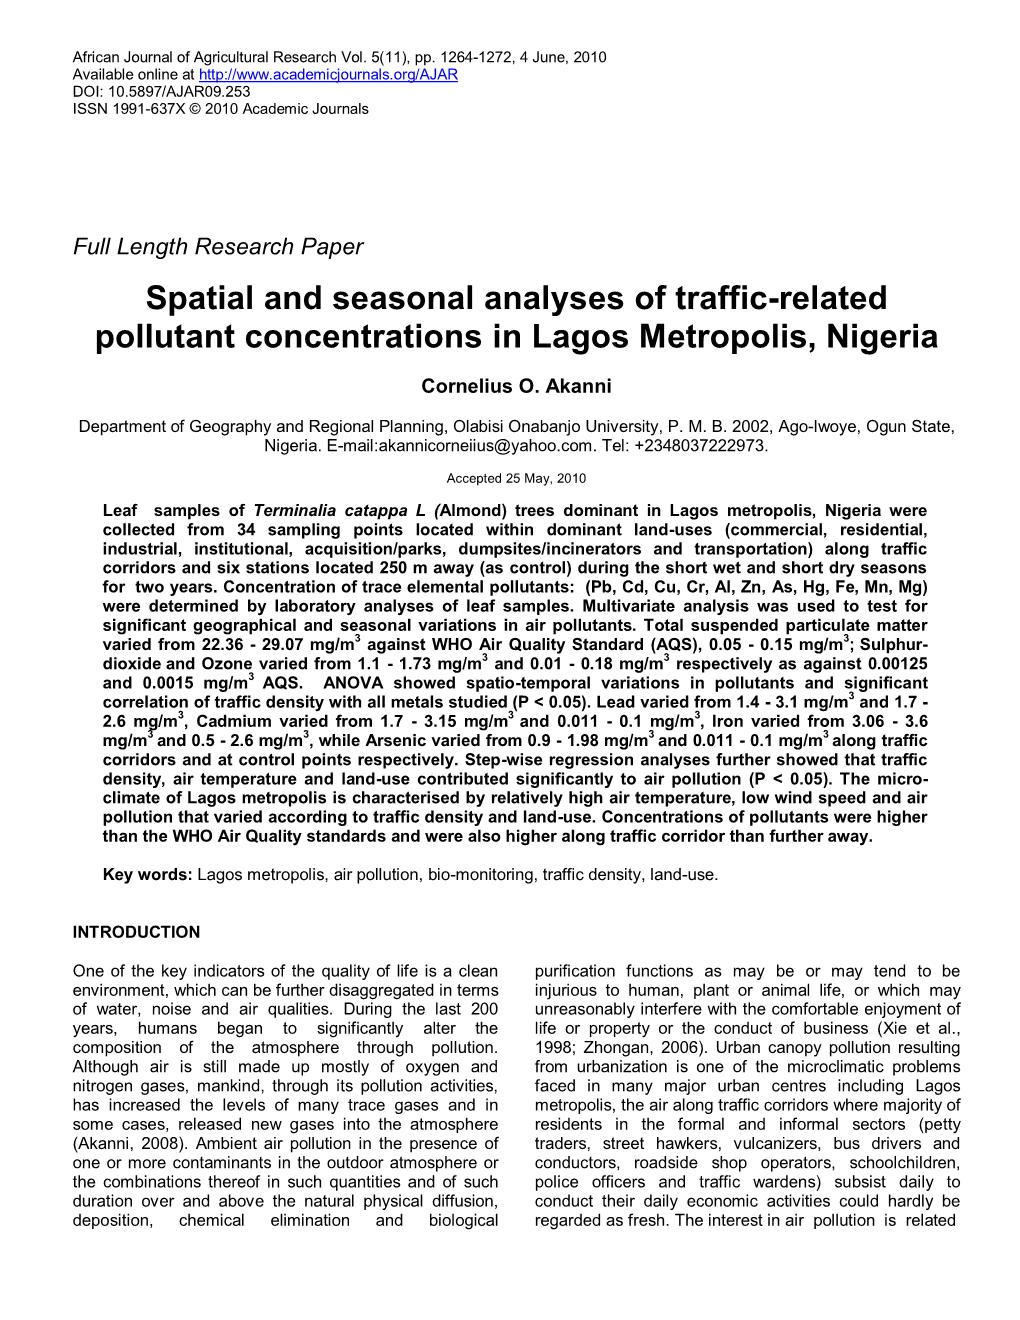 Spatial and Seasonal Analysis of Traffic-Related Pollutant Concentrations In